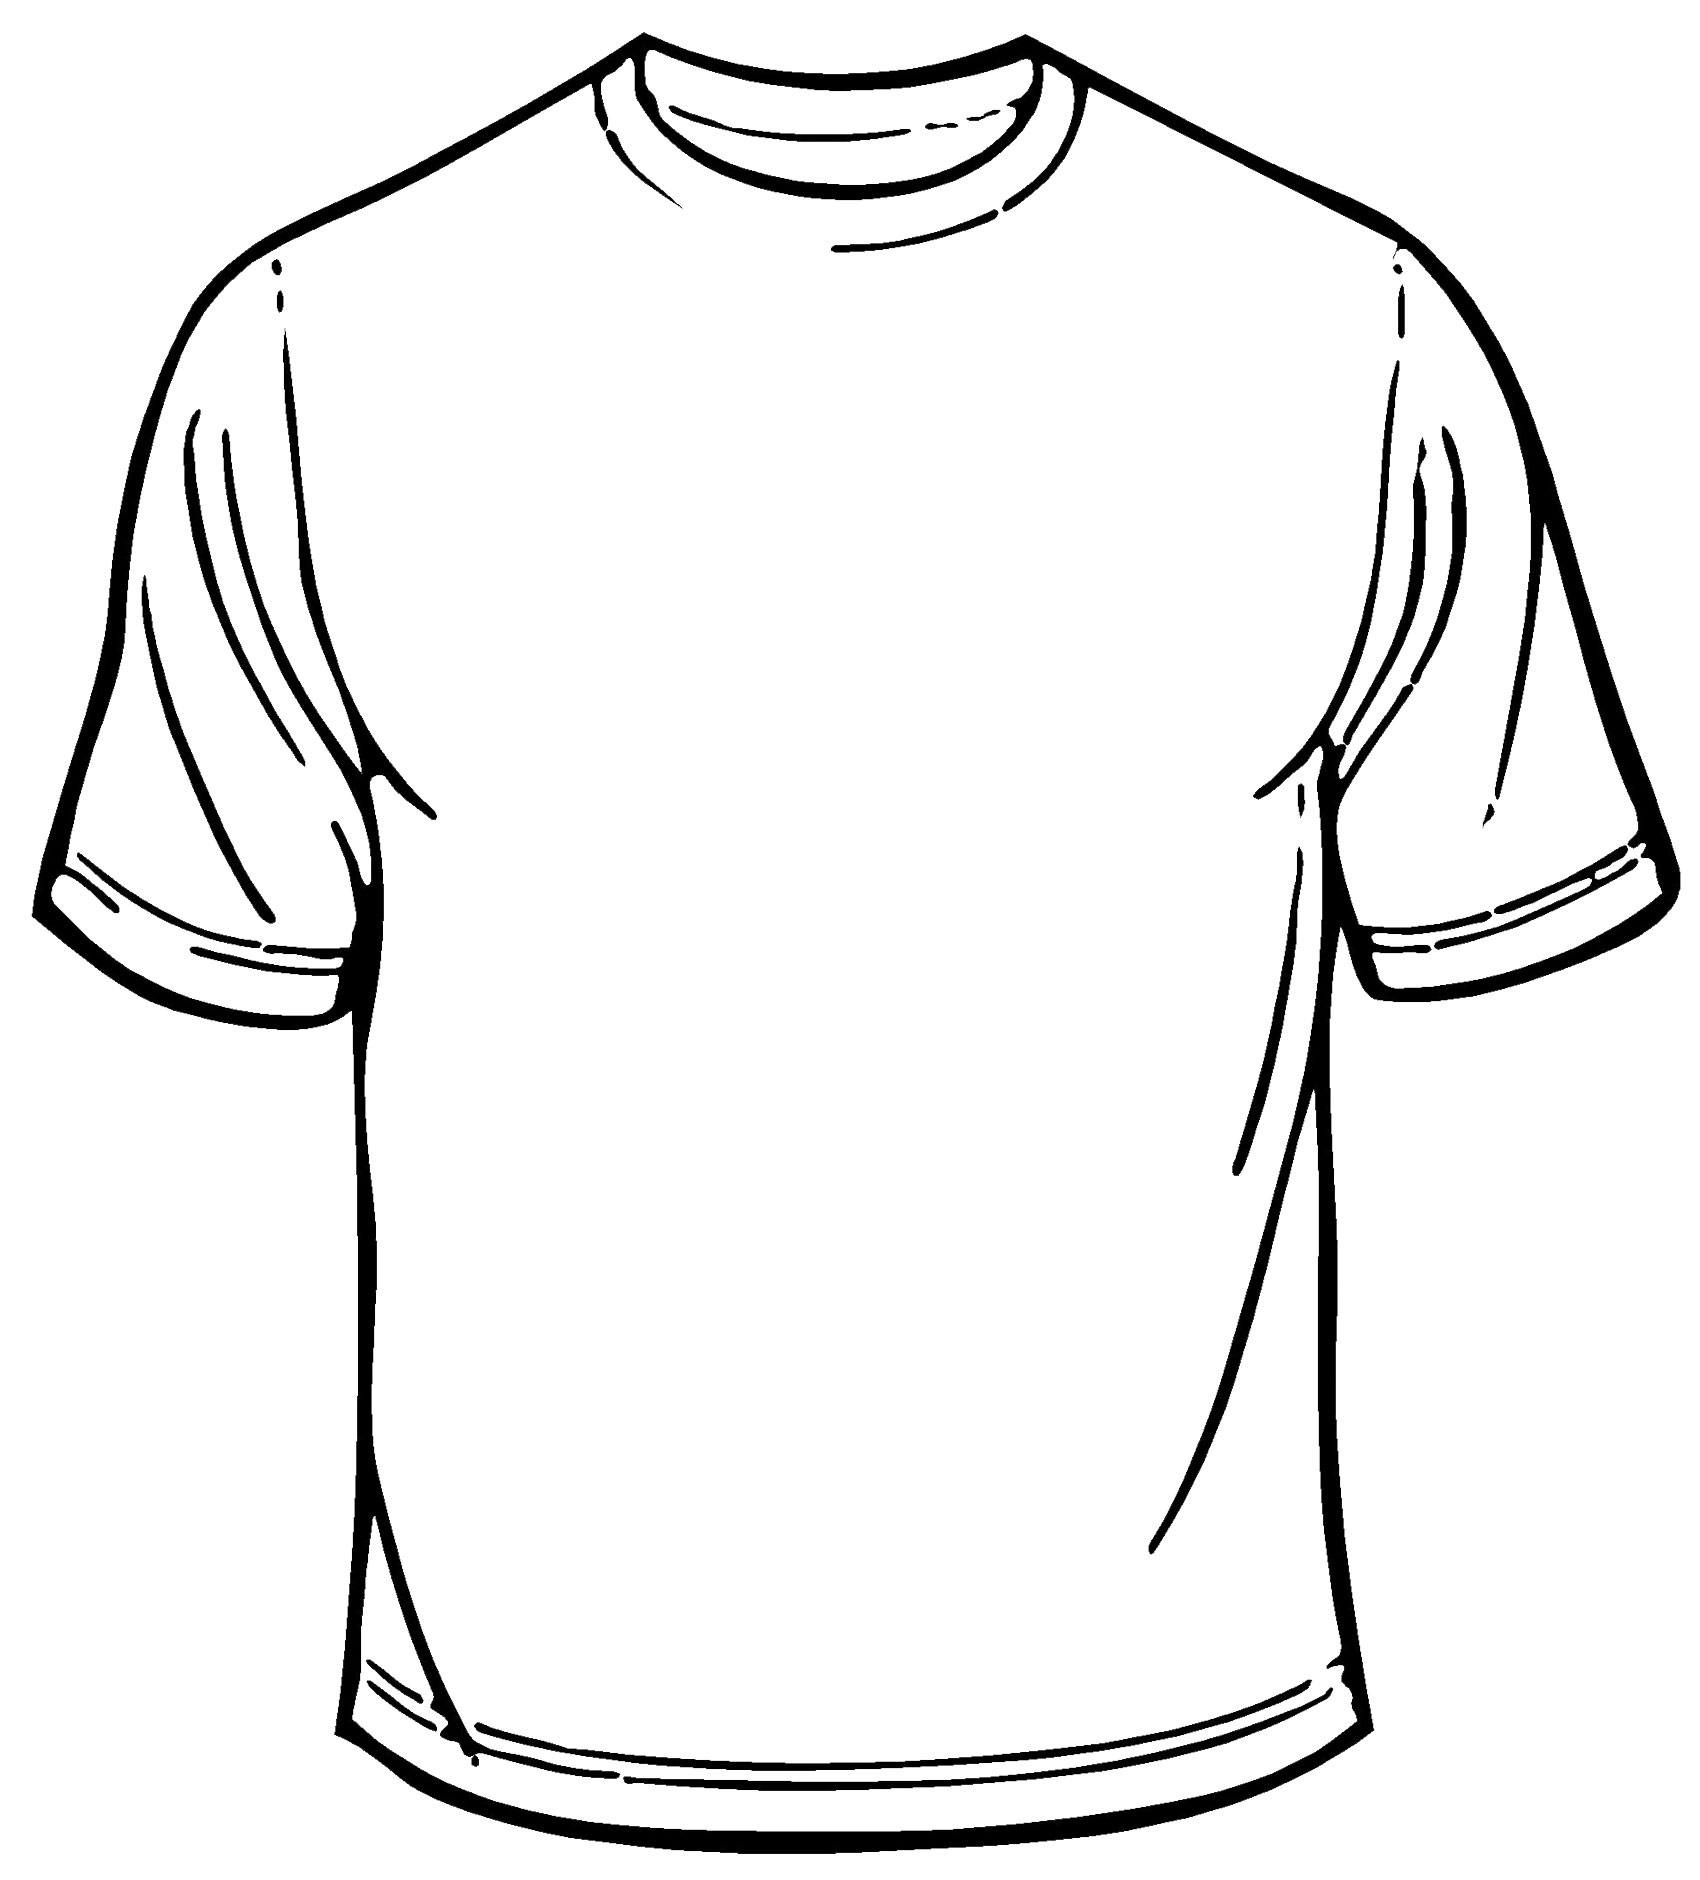 Blank T-Shirt - Cliparts.co pertaining to Blank Tee Shirt Template